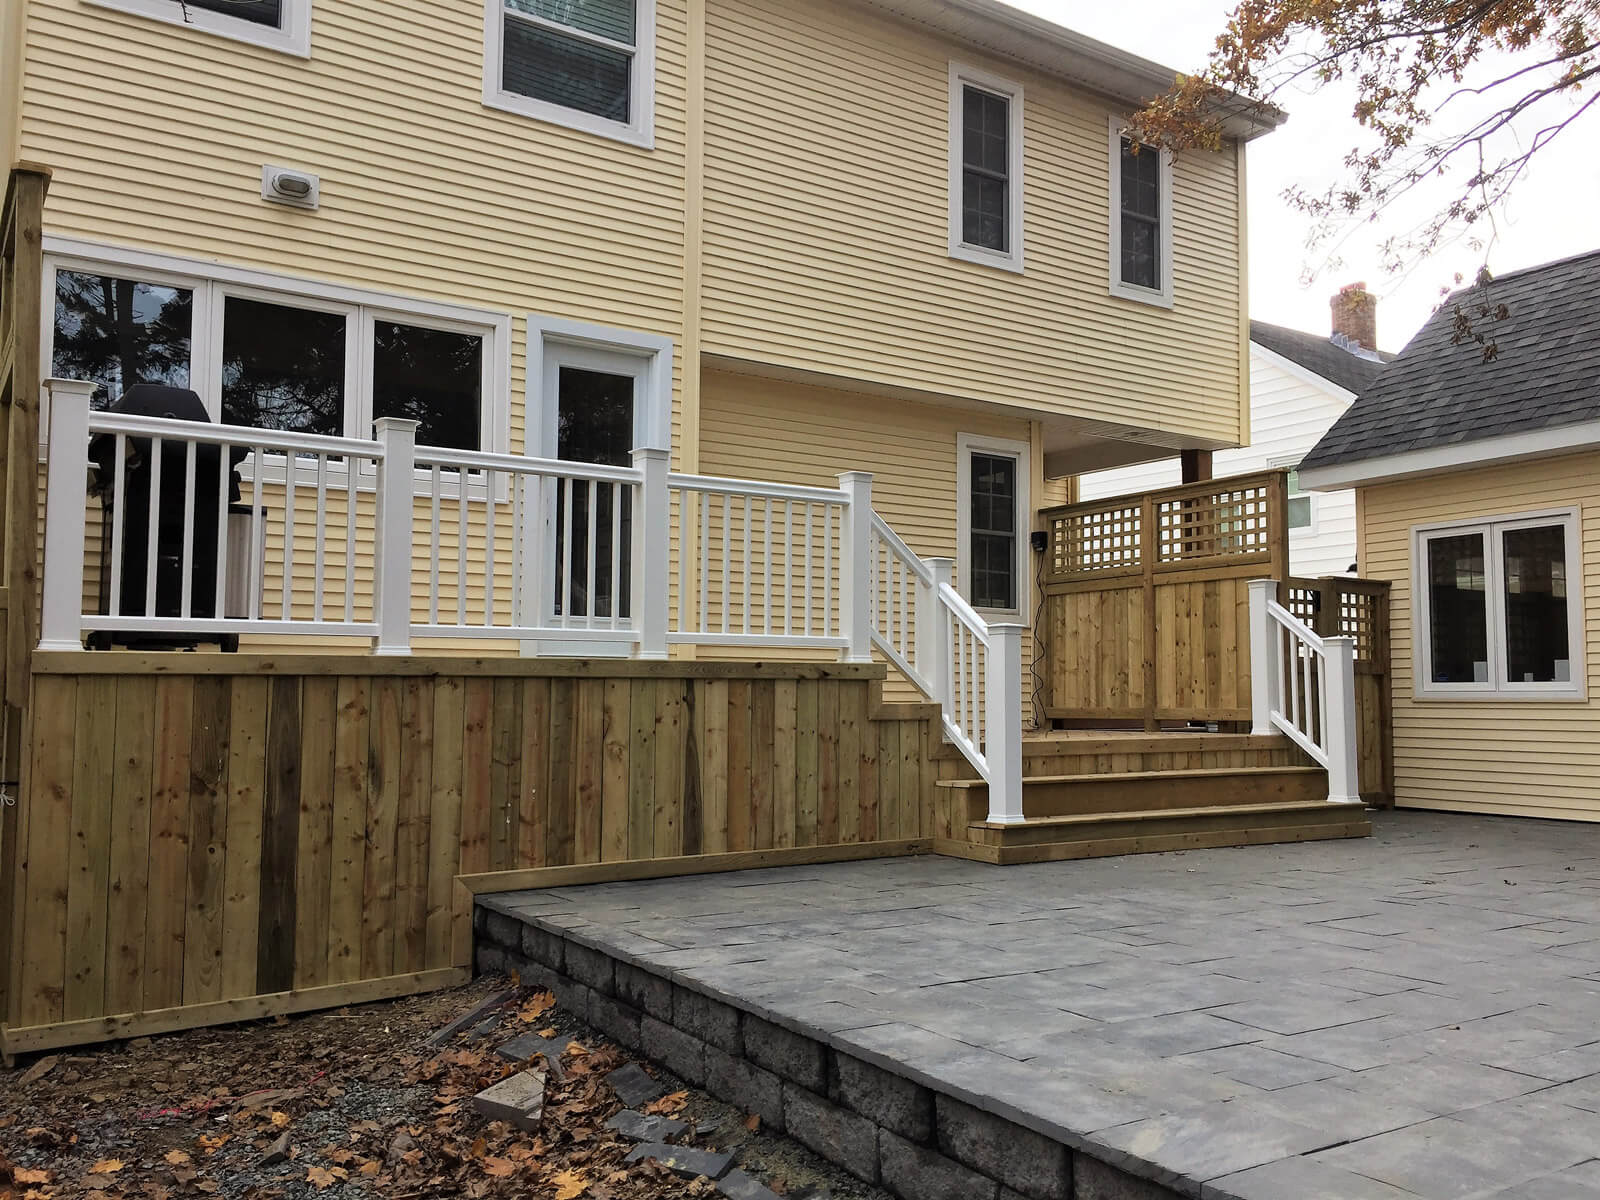 Outdoor wooden deck and hardscaped patio